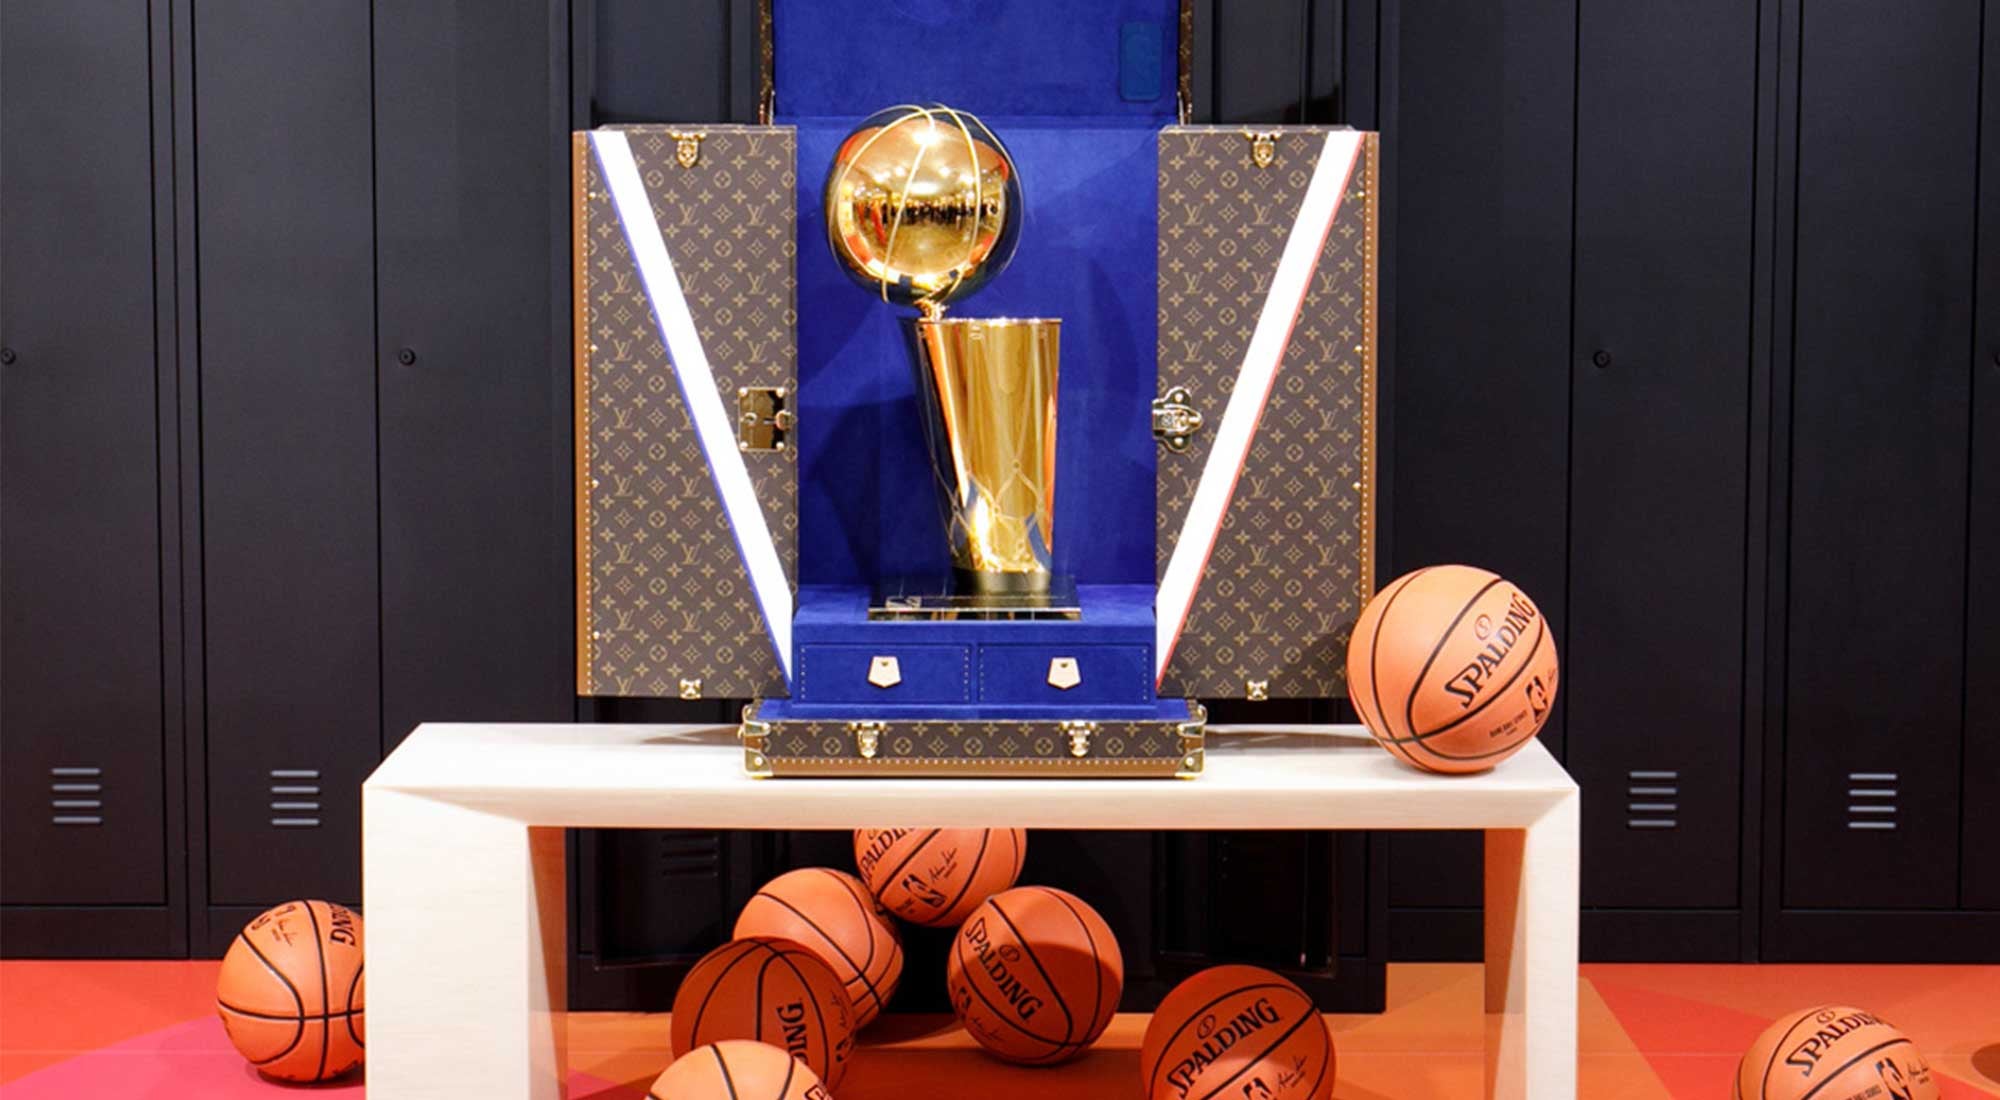 Enter the court in style with the Louis Vuitton x NBA 2020 Men's